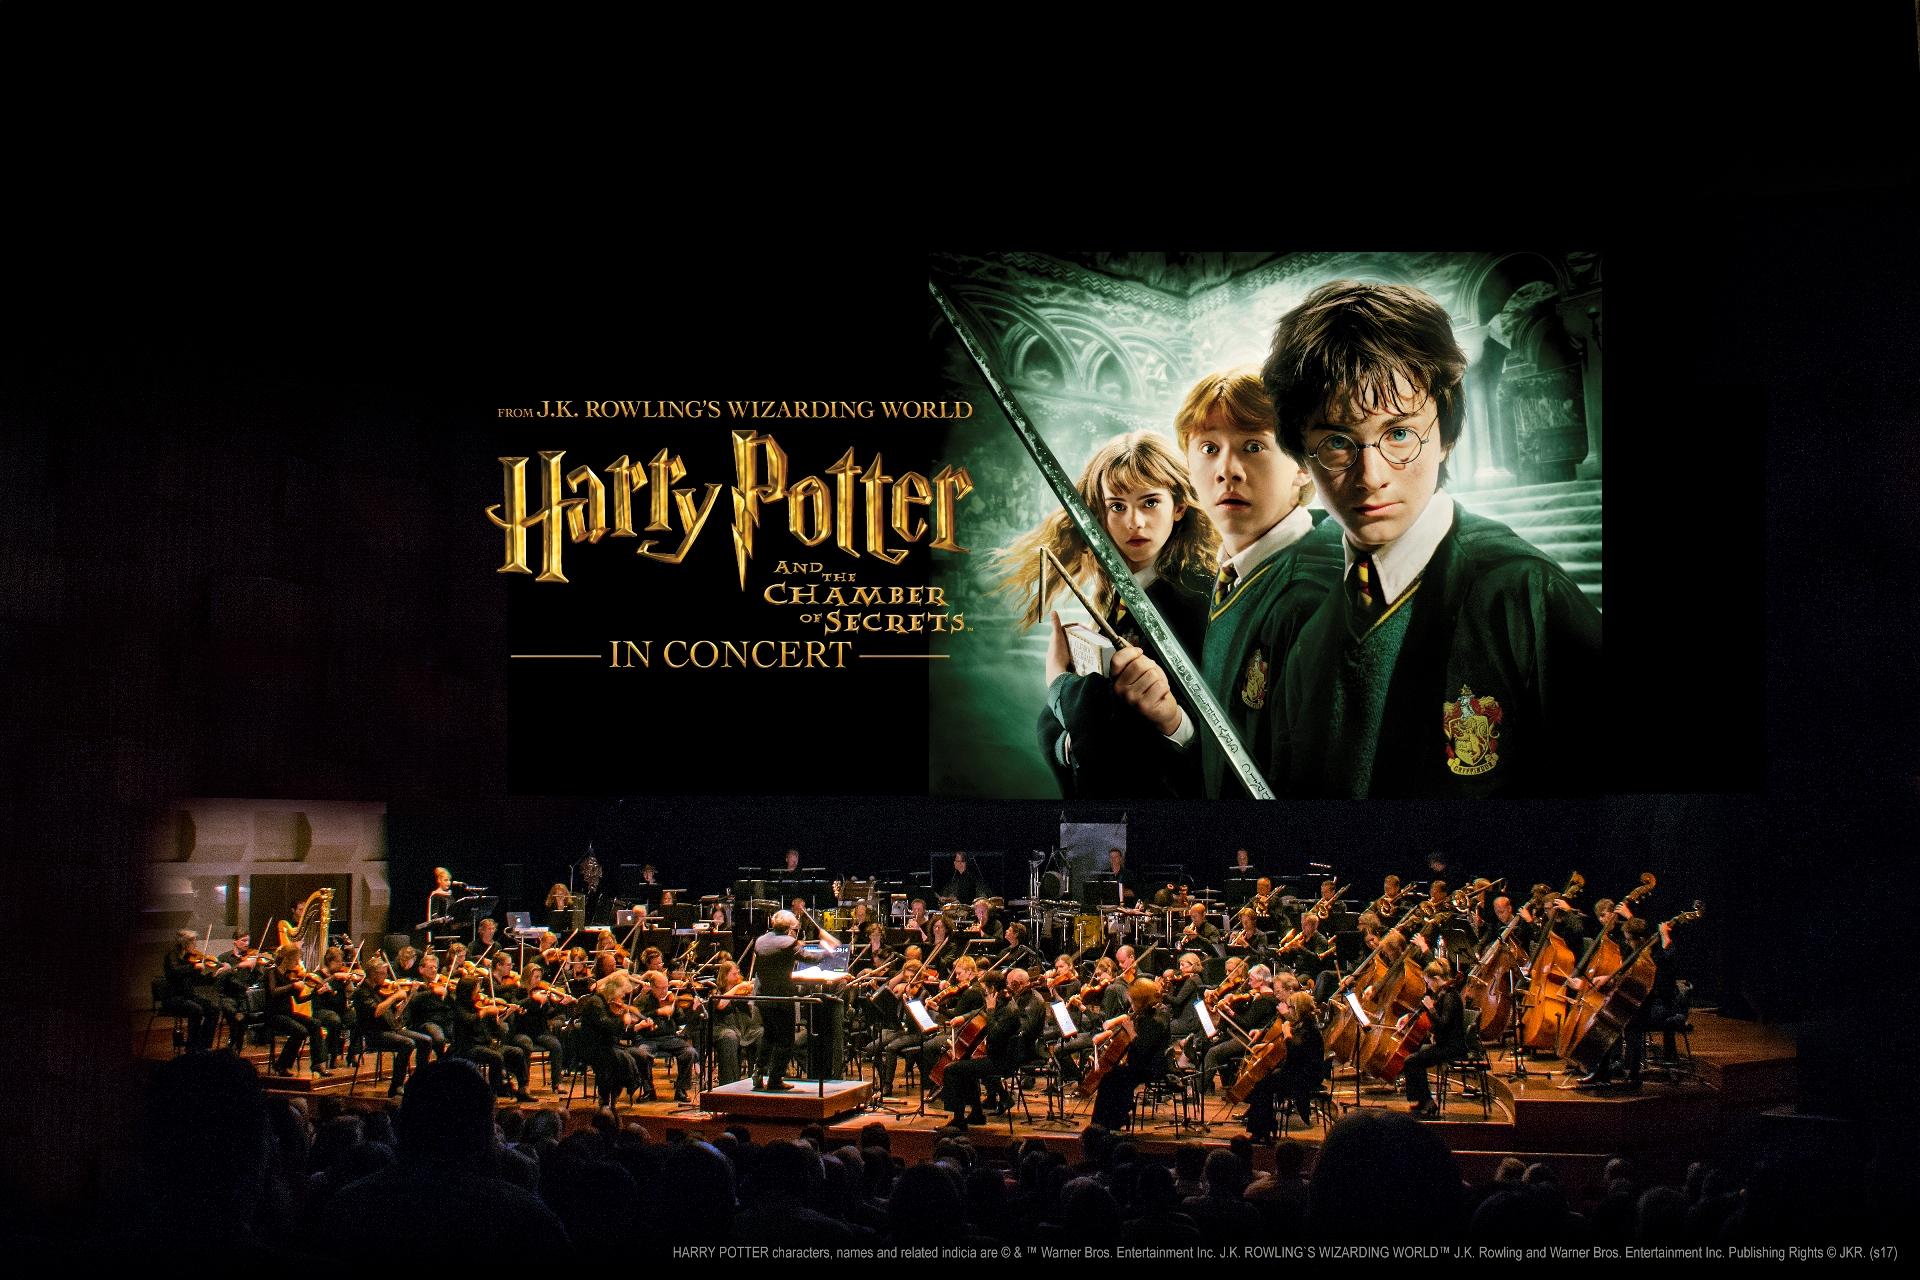 HSO to perform music of ‘Harry Potter’ movies